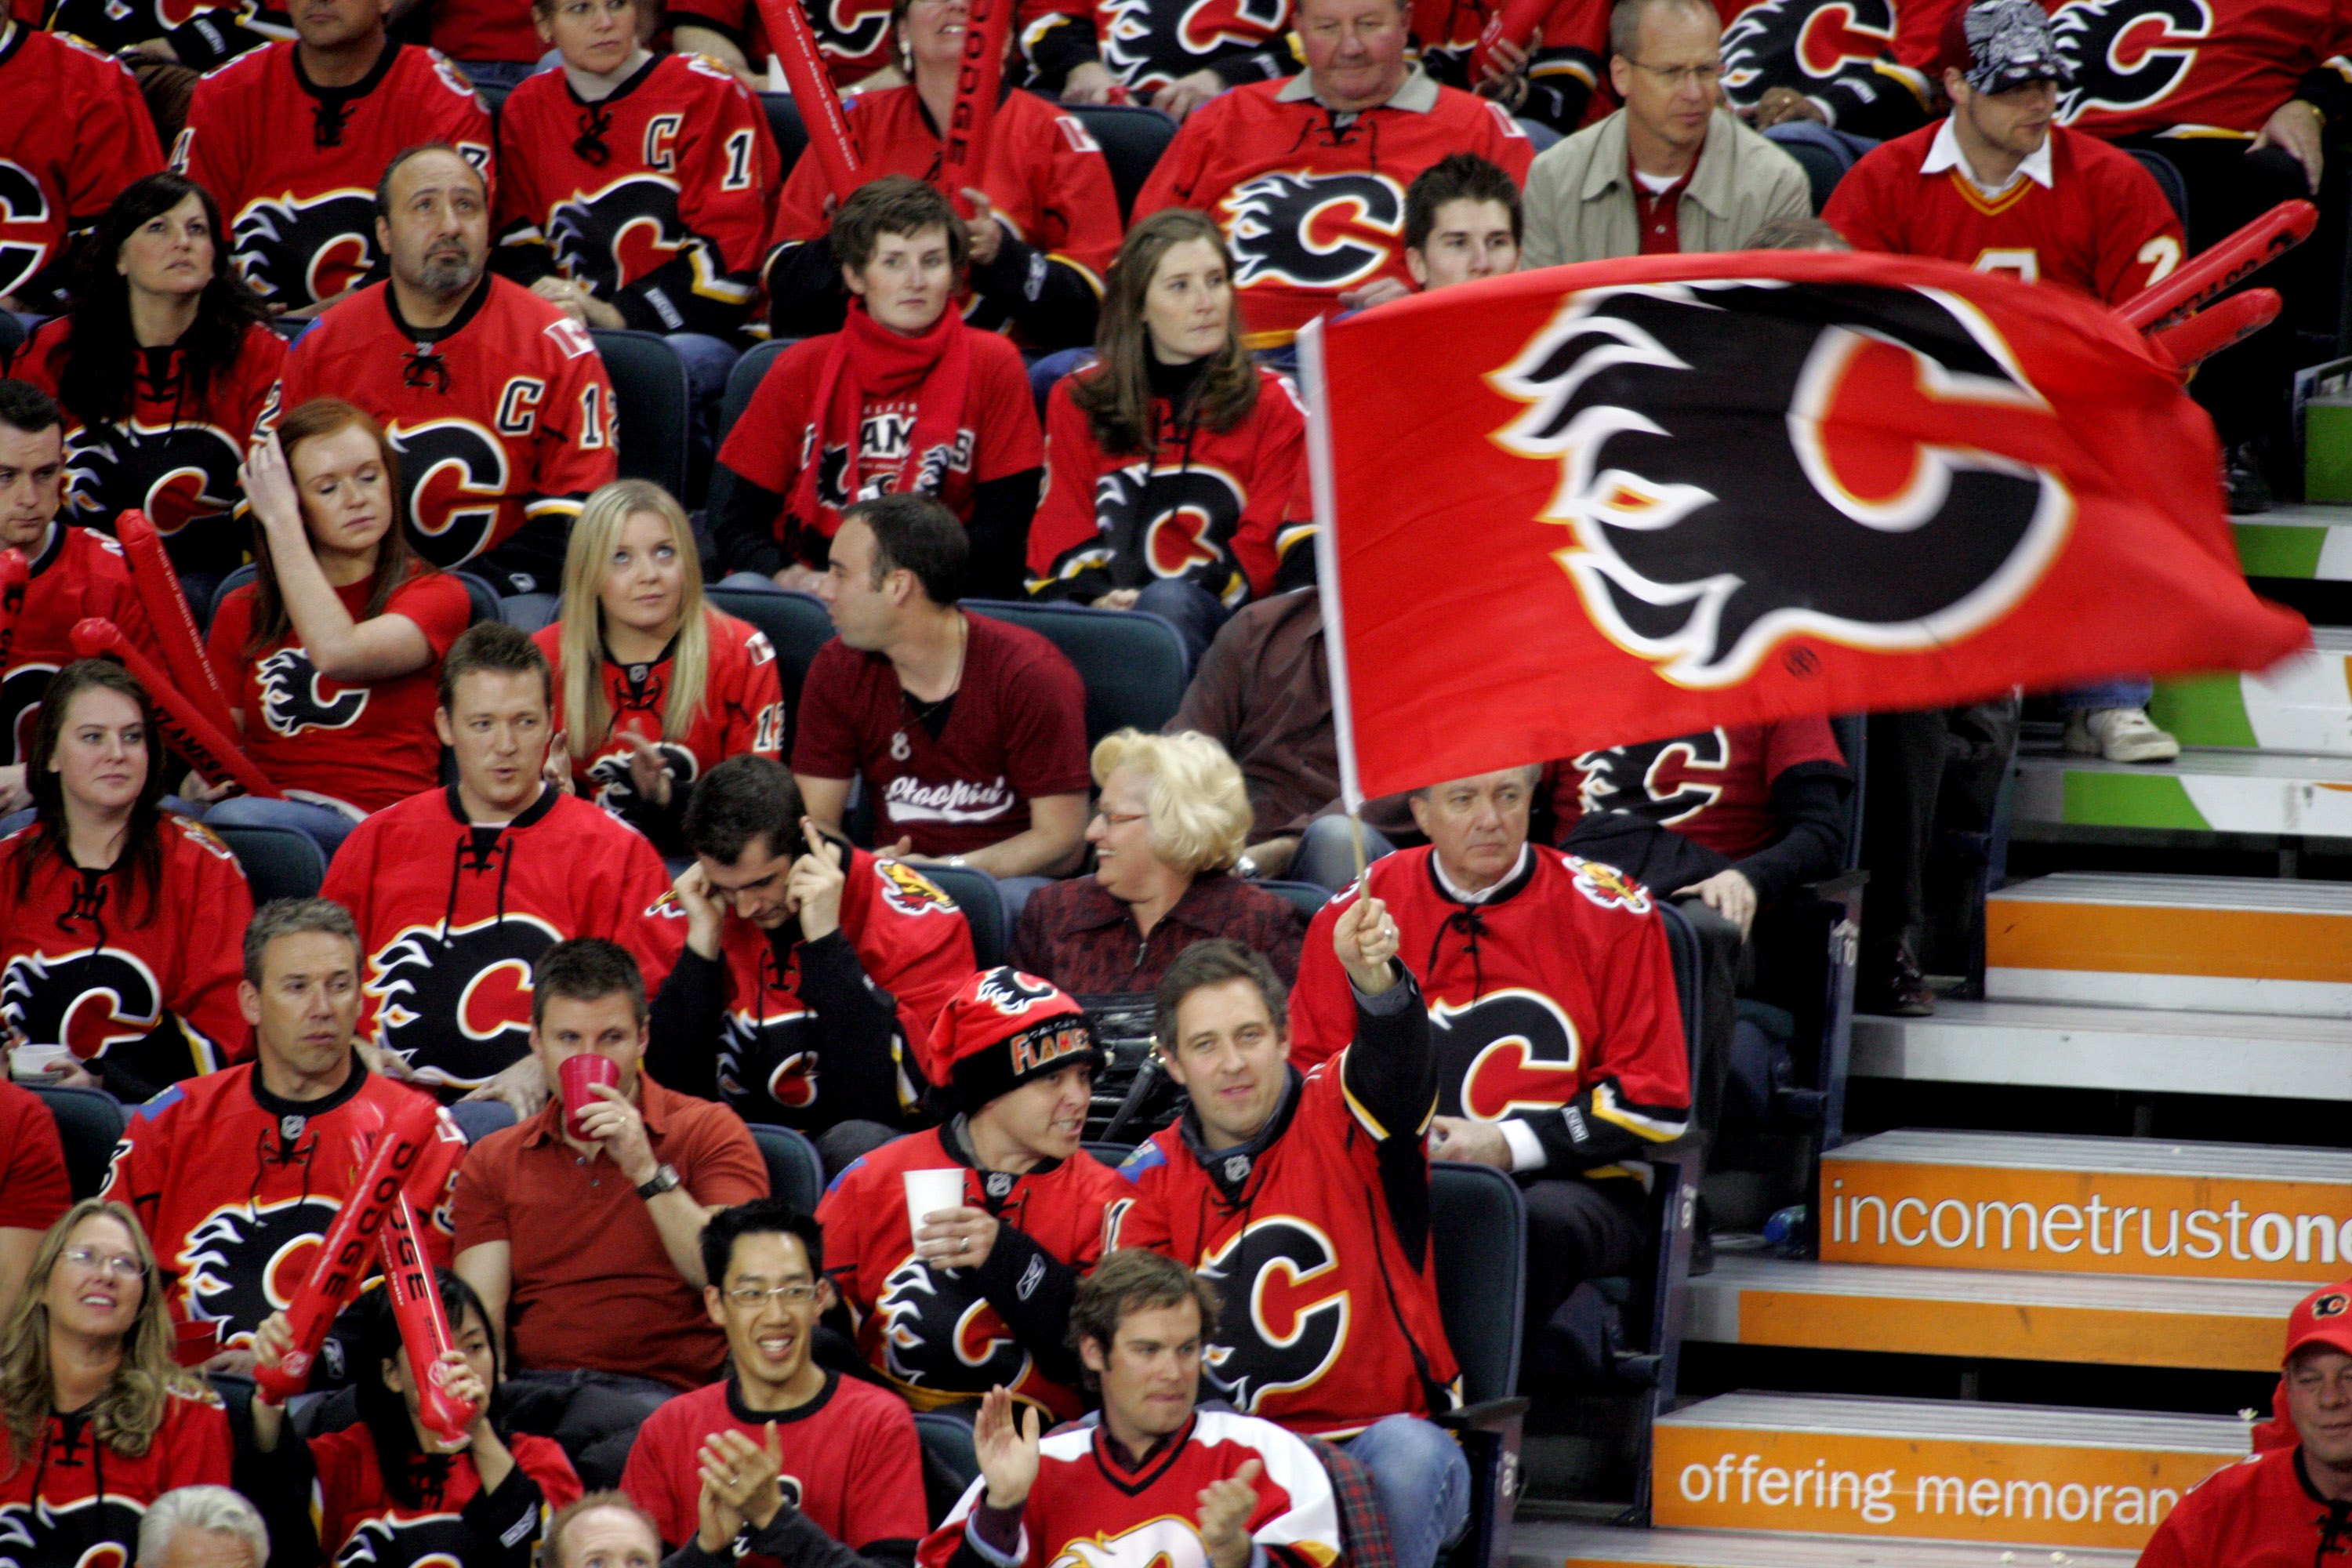 CALGARY, CANADA - APRIL 15:  Fans of the Calgary Flames form a'Seas of Red' to support their team against the San Jose Sharks during game four of the Western Conference Quarterfinals of the 2008 NHL Stanley Cup Playoffs at Pengrowth Saddledome on April 15